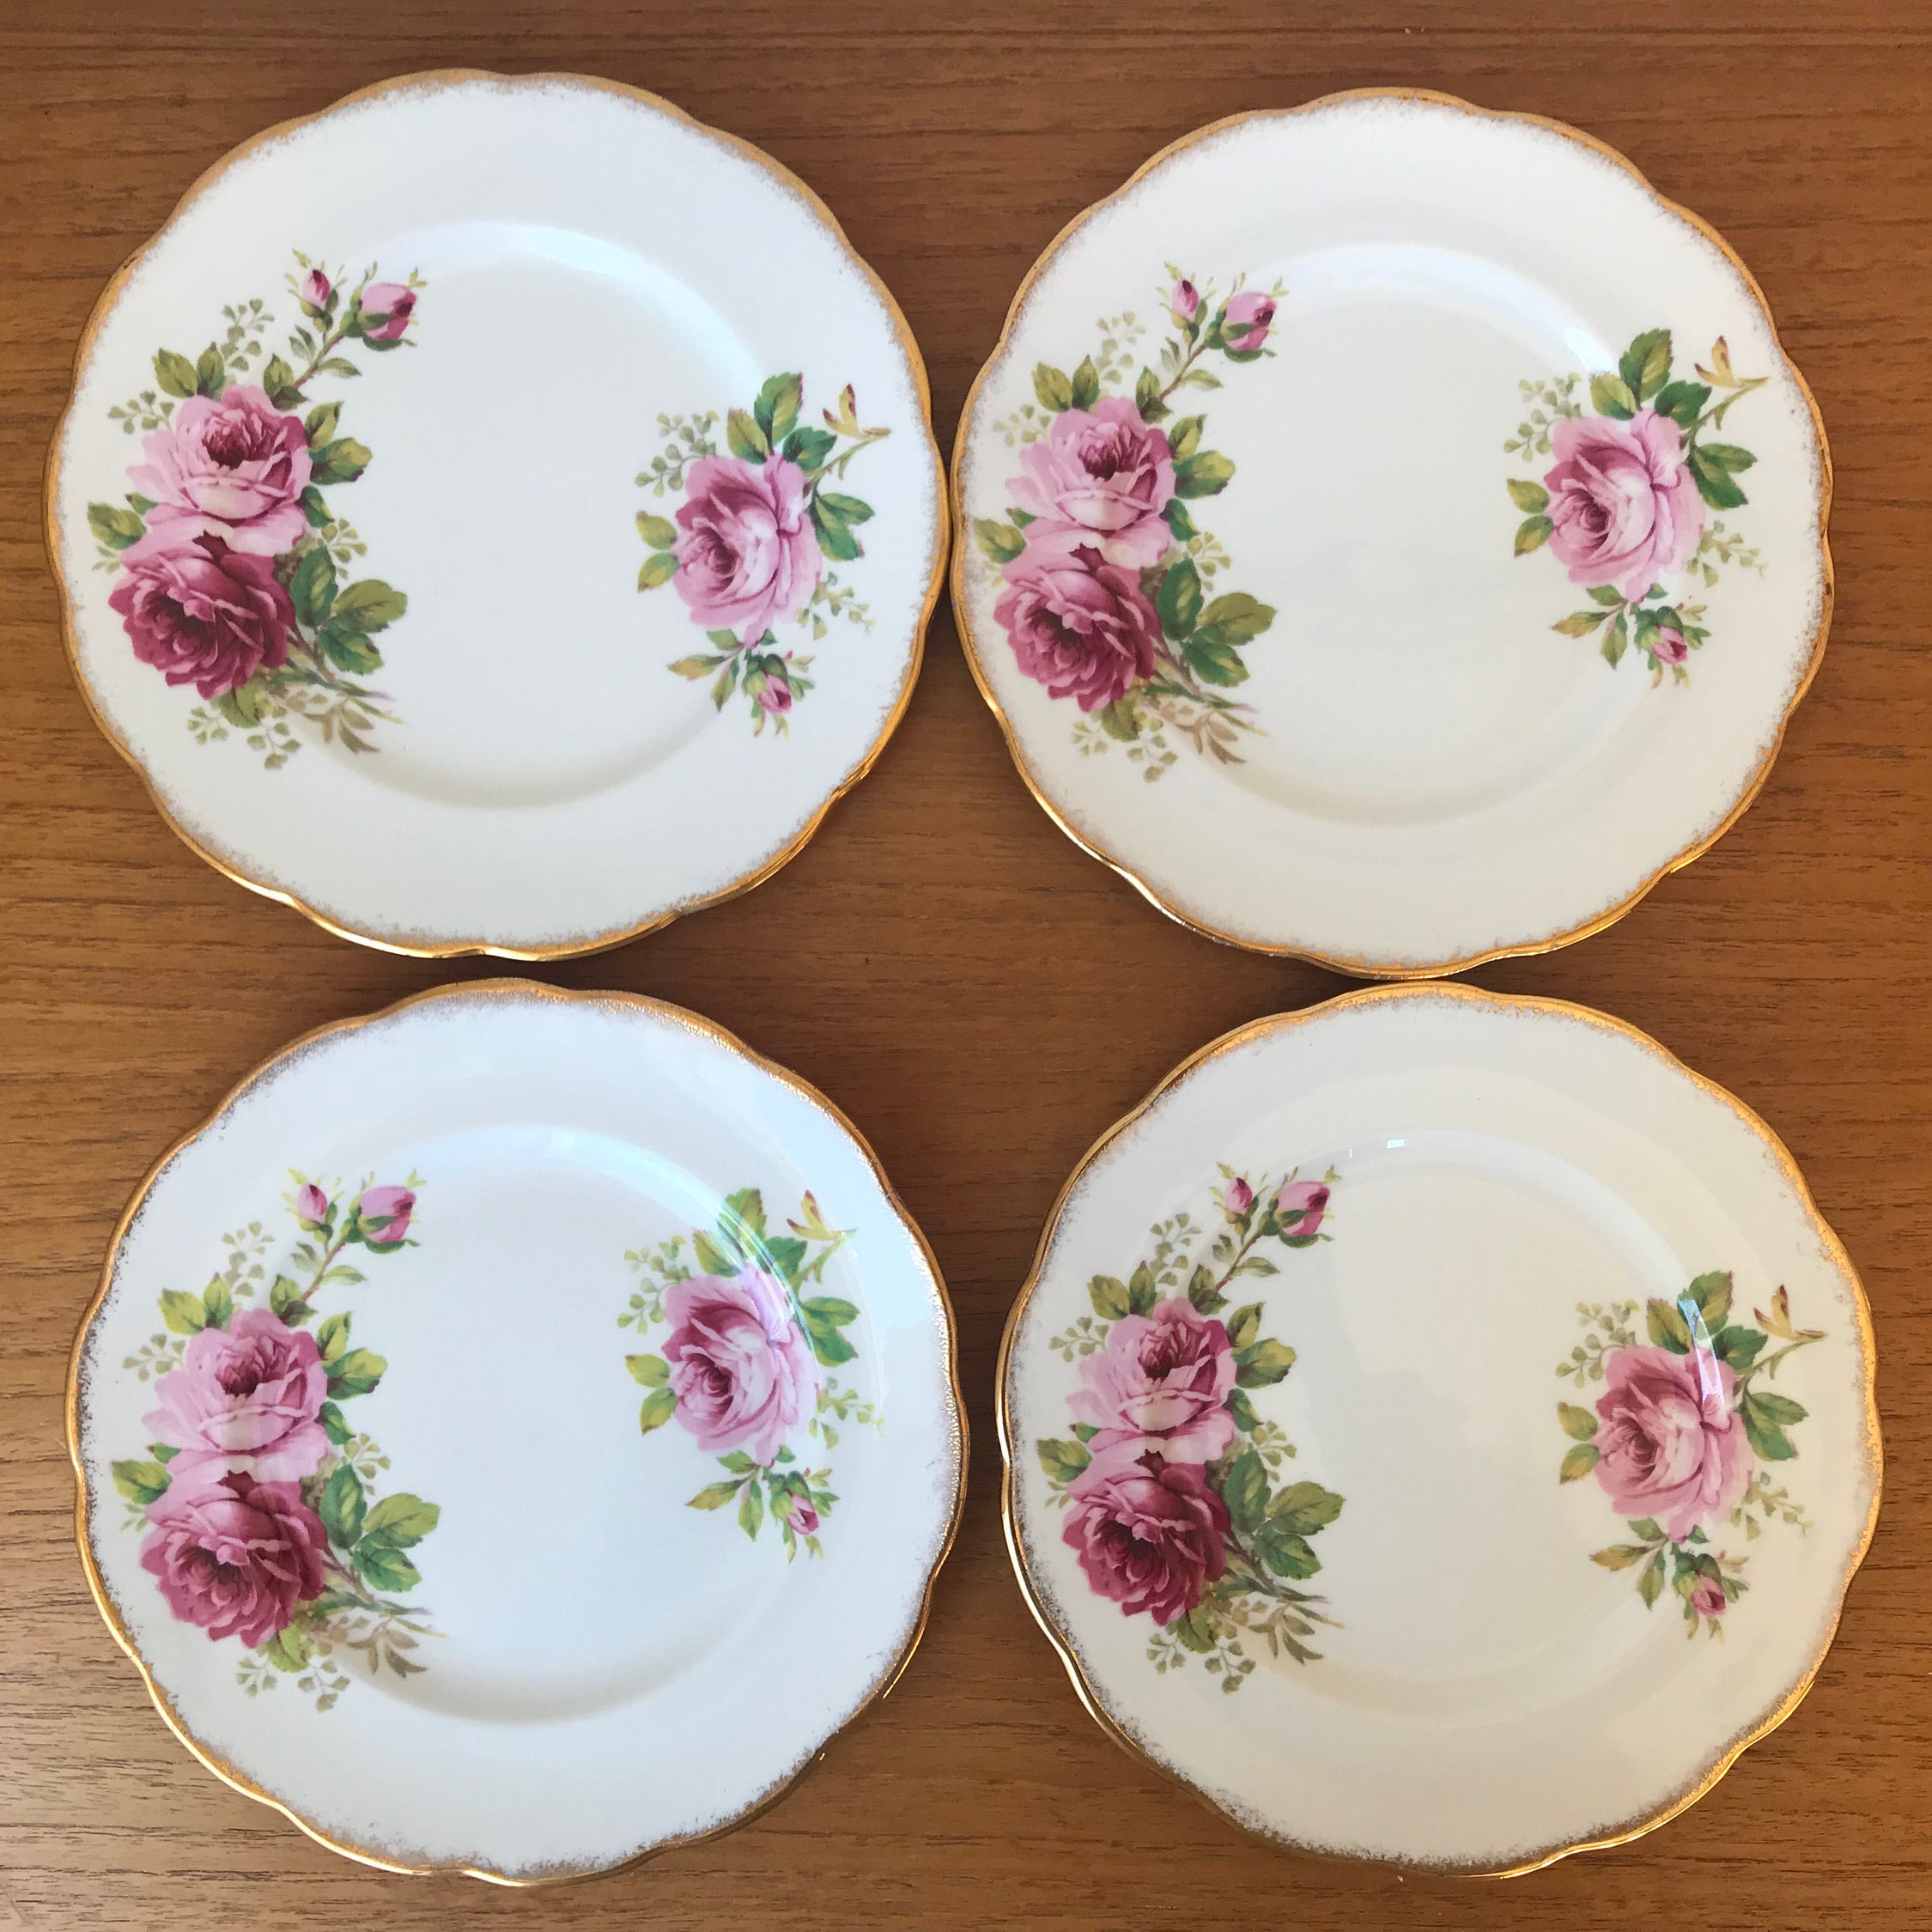 Vintage luncheon plates with cups